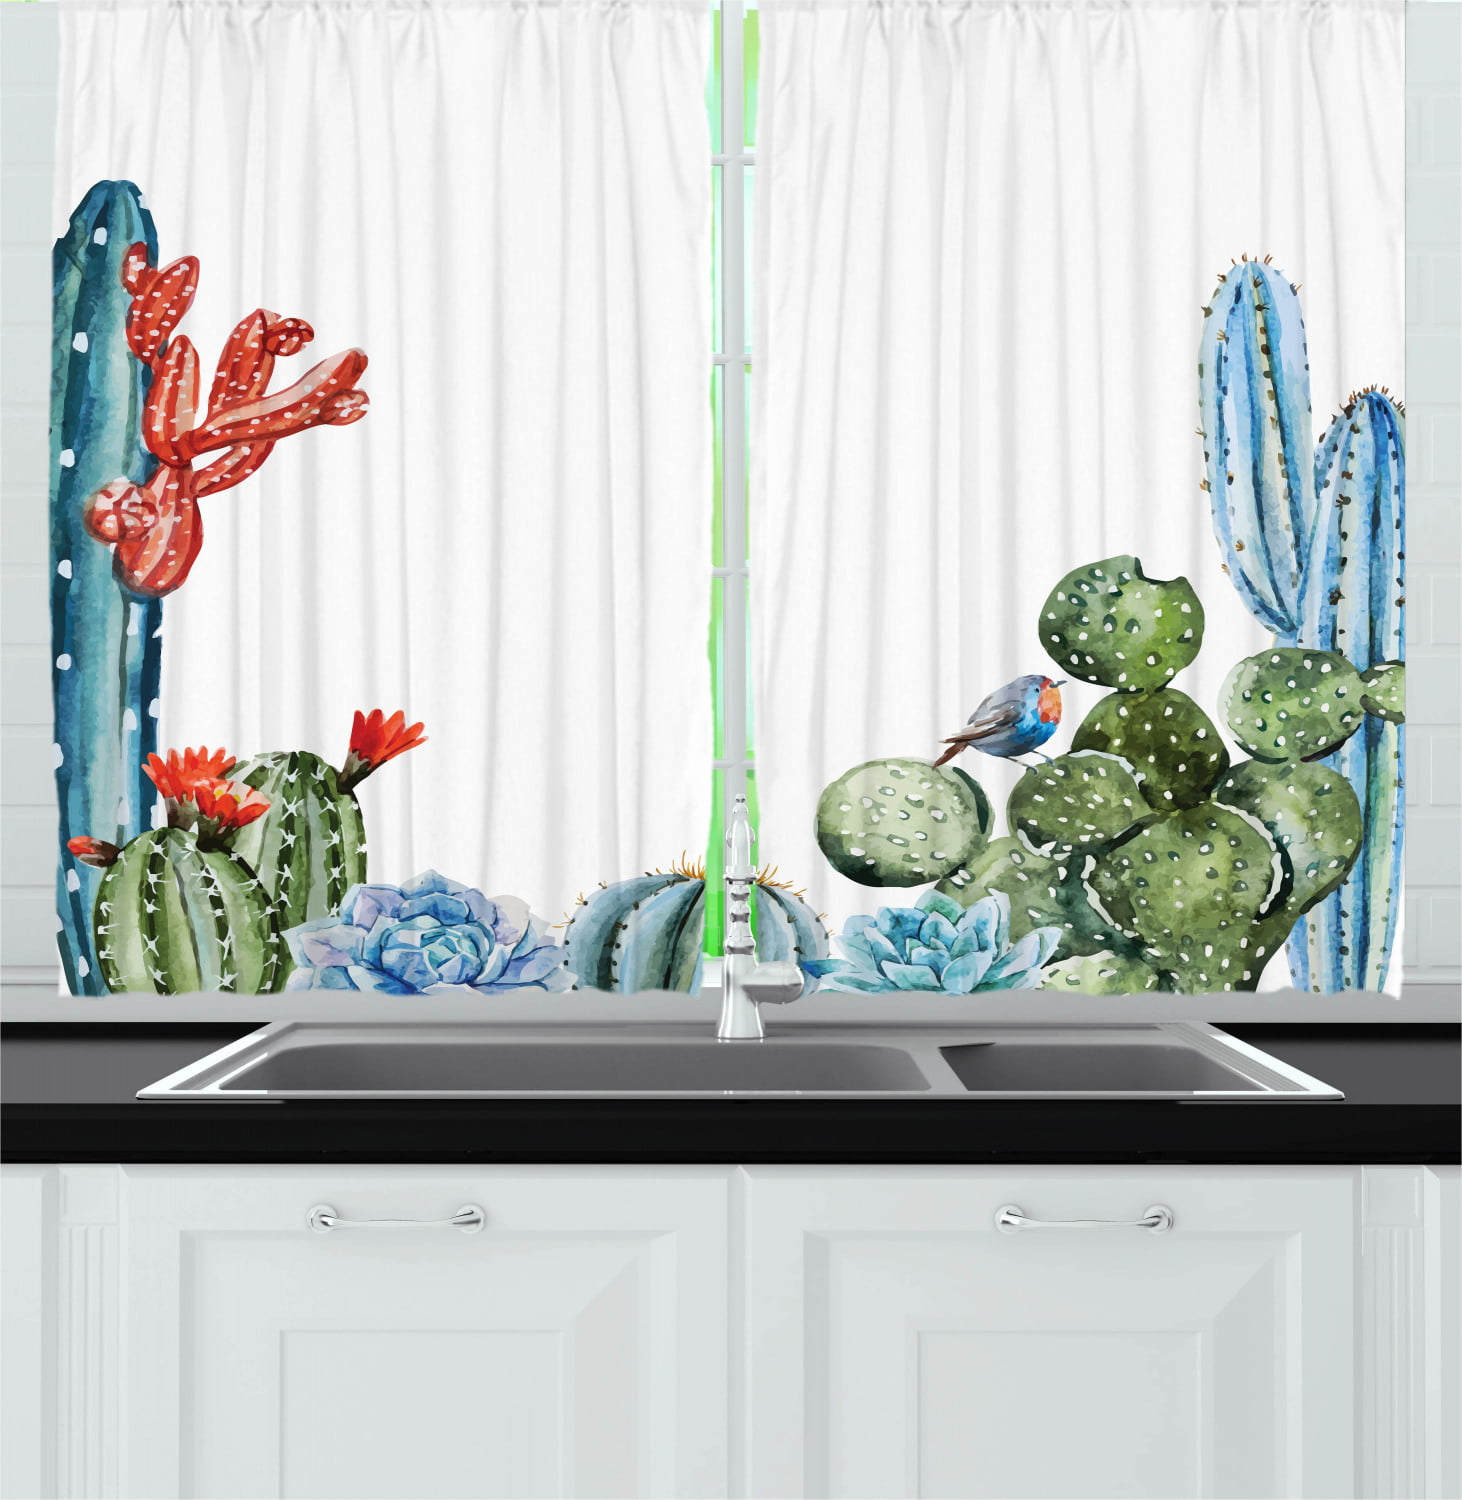 Cactus and Flower on Black Kitchen Curtain Window Drapes 2 Panel Set 55"x39" 